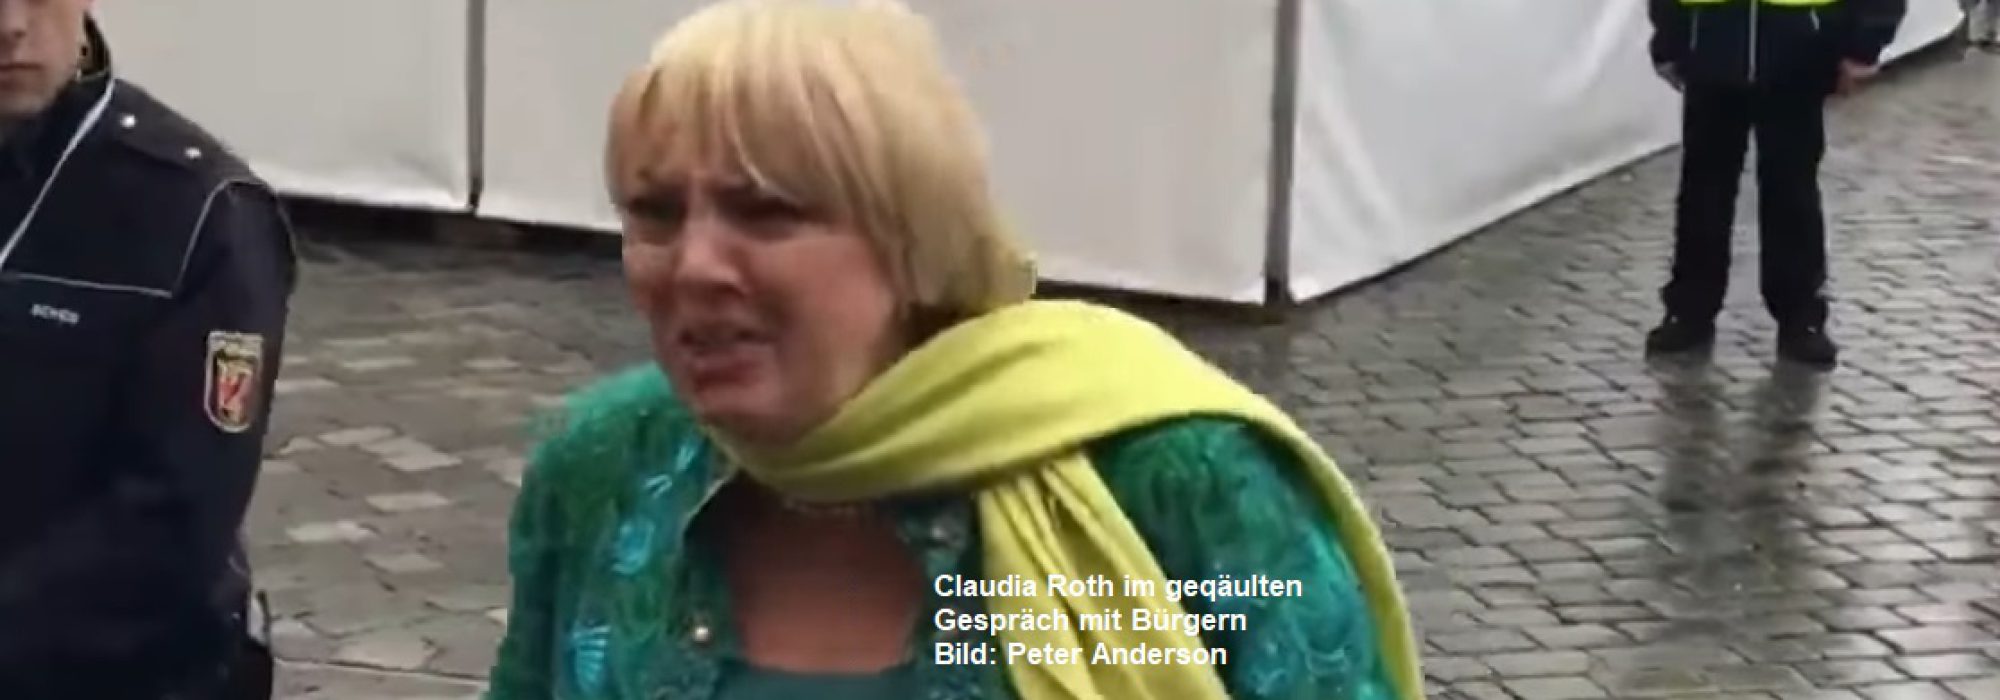 Claudia-Roth-AfD-Christoph-Maier-3